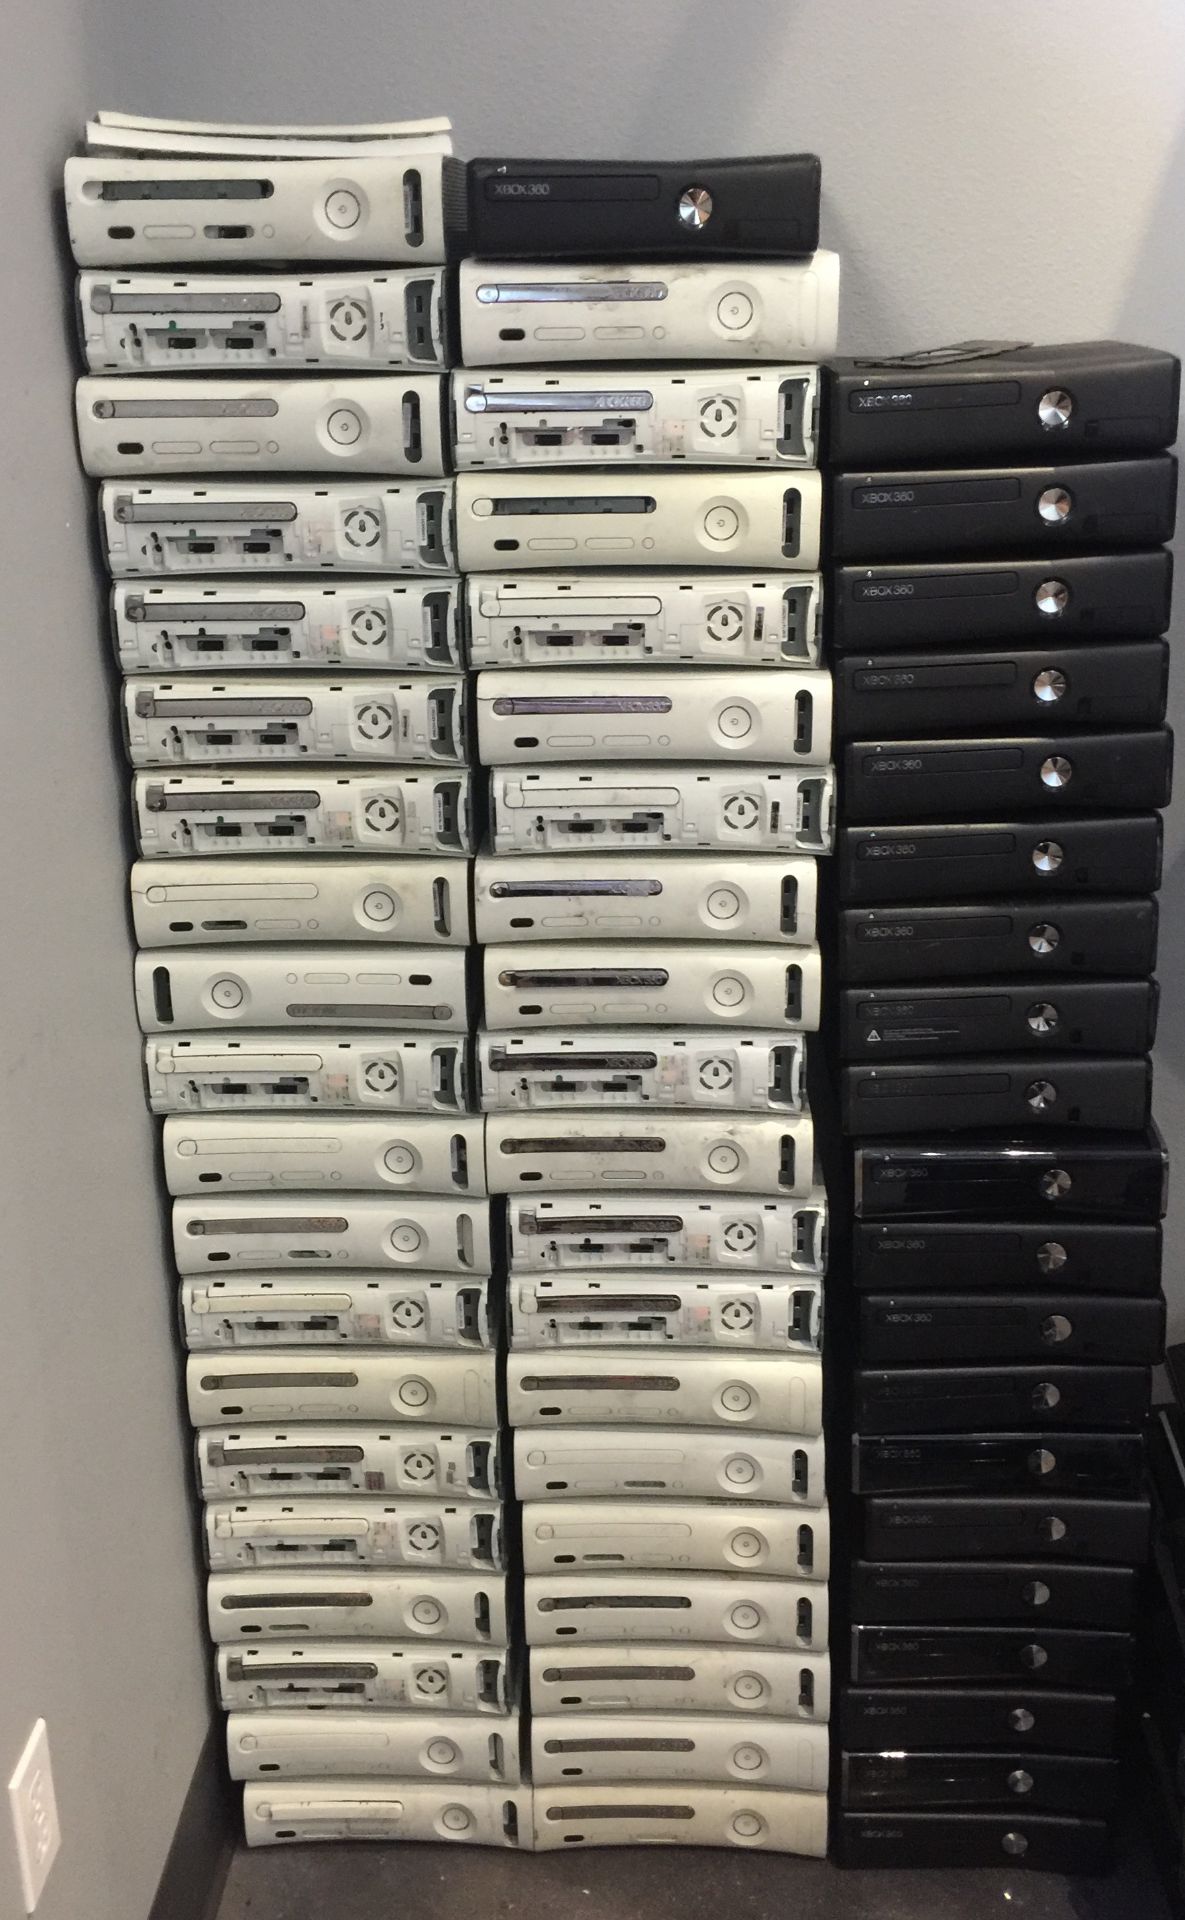 20 XBOX UNITS, NO IDEA OF CONDITION, SOLD AS IS